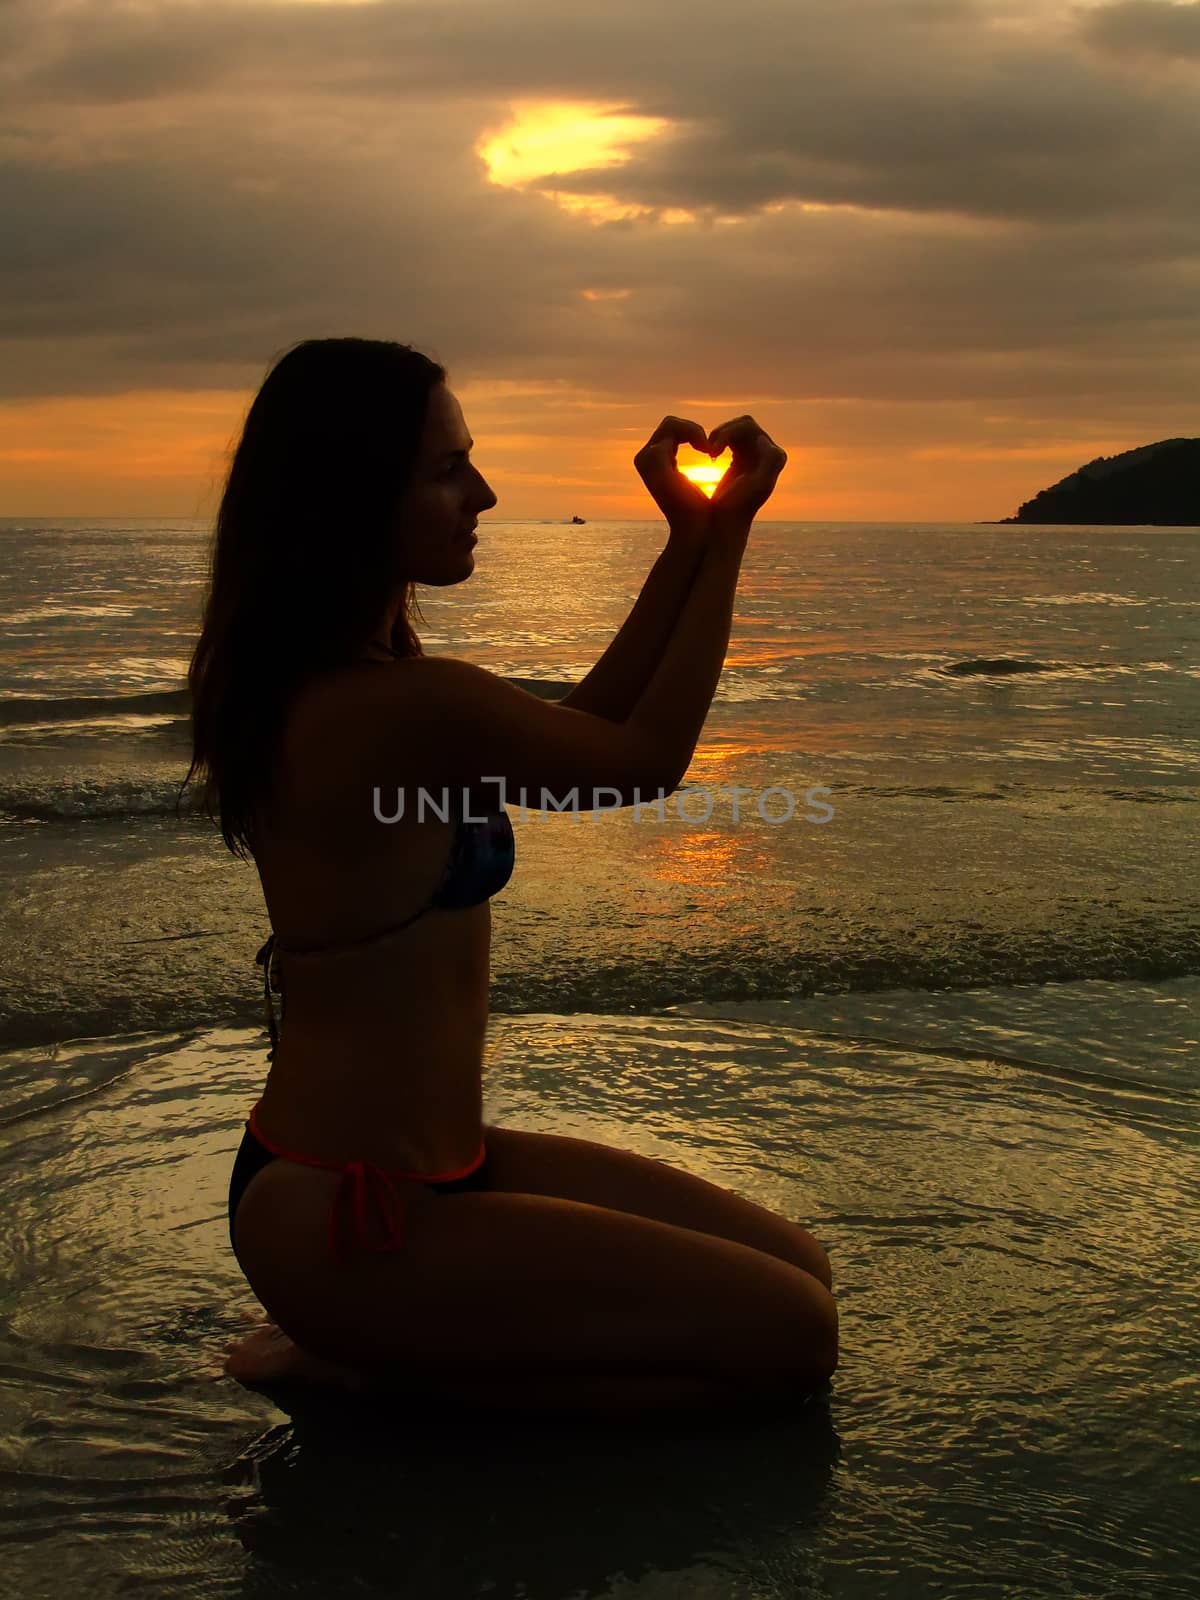 Young woman shaping heart with her hands at sunset, Langkawi island, Malaysia, Southeast Asia